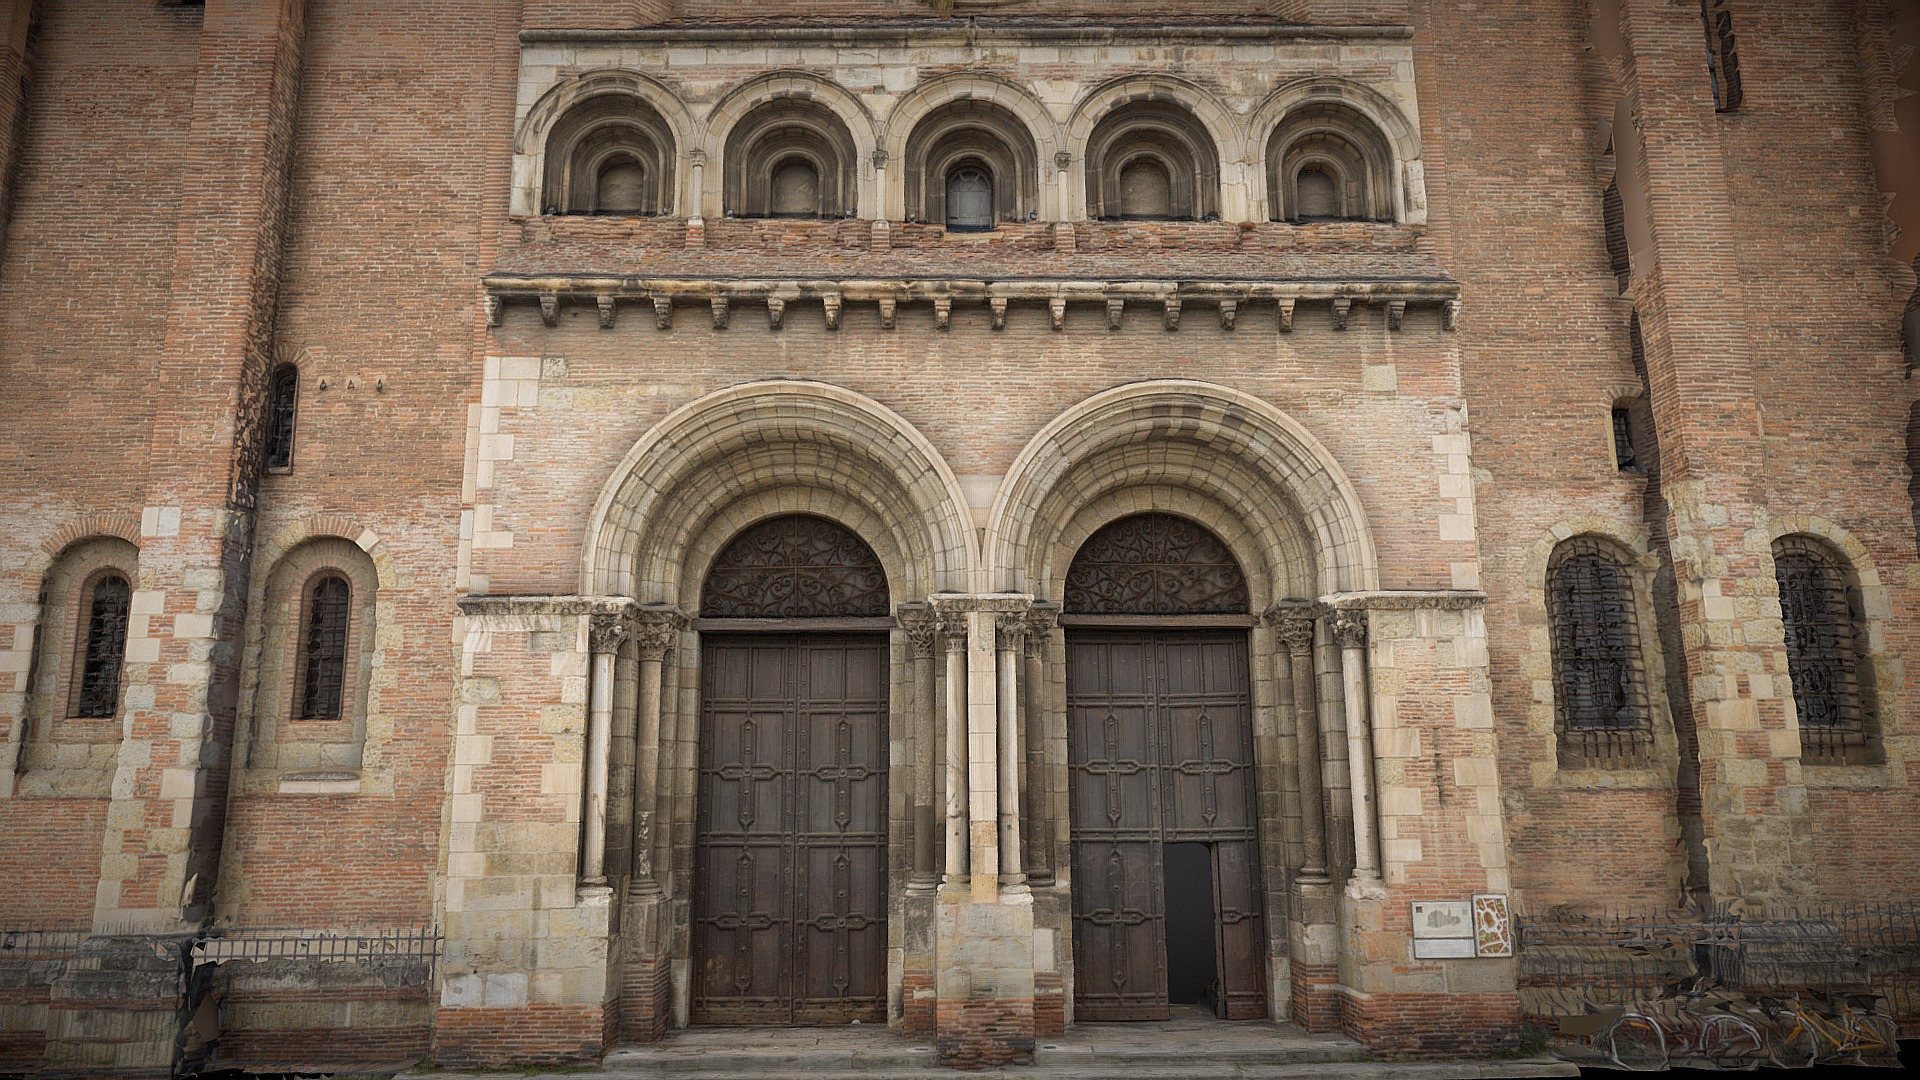 3D model Saint Sernin – Portada occidental - This is a 3D model of the Saint Sernin - Portada occidental. The 3D model is about a brick building with arched doorways.